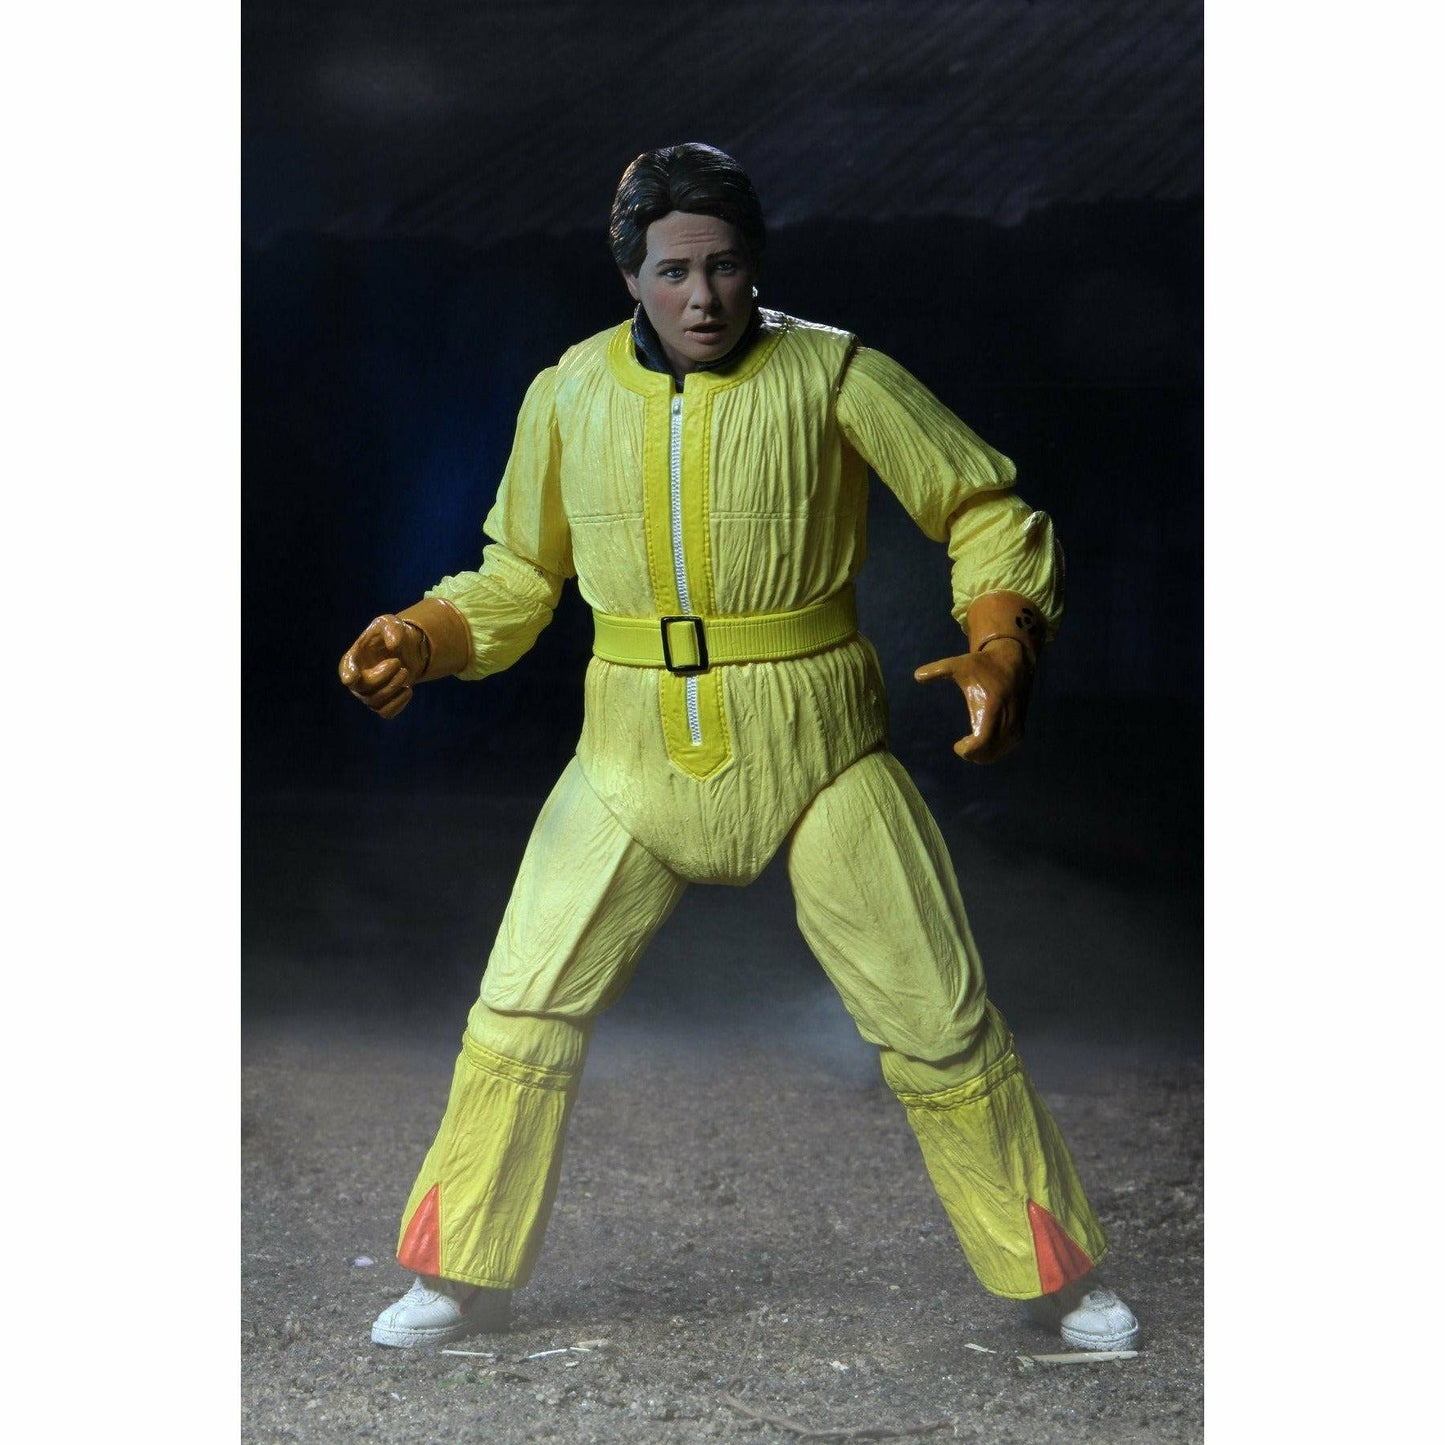 NECA Zurück in die Zukunft Actionfigur im 7-Zoll-Maßstab – Ultimate Marty McFly (1955 „Tales From Space“)